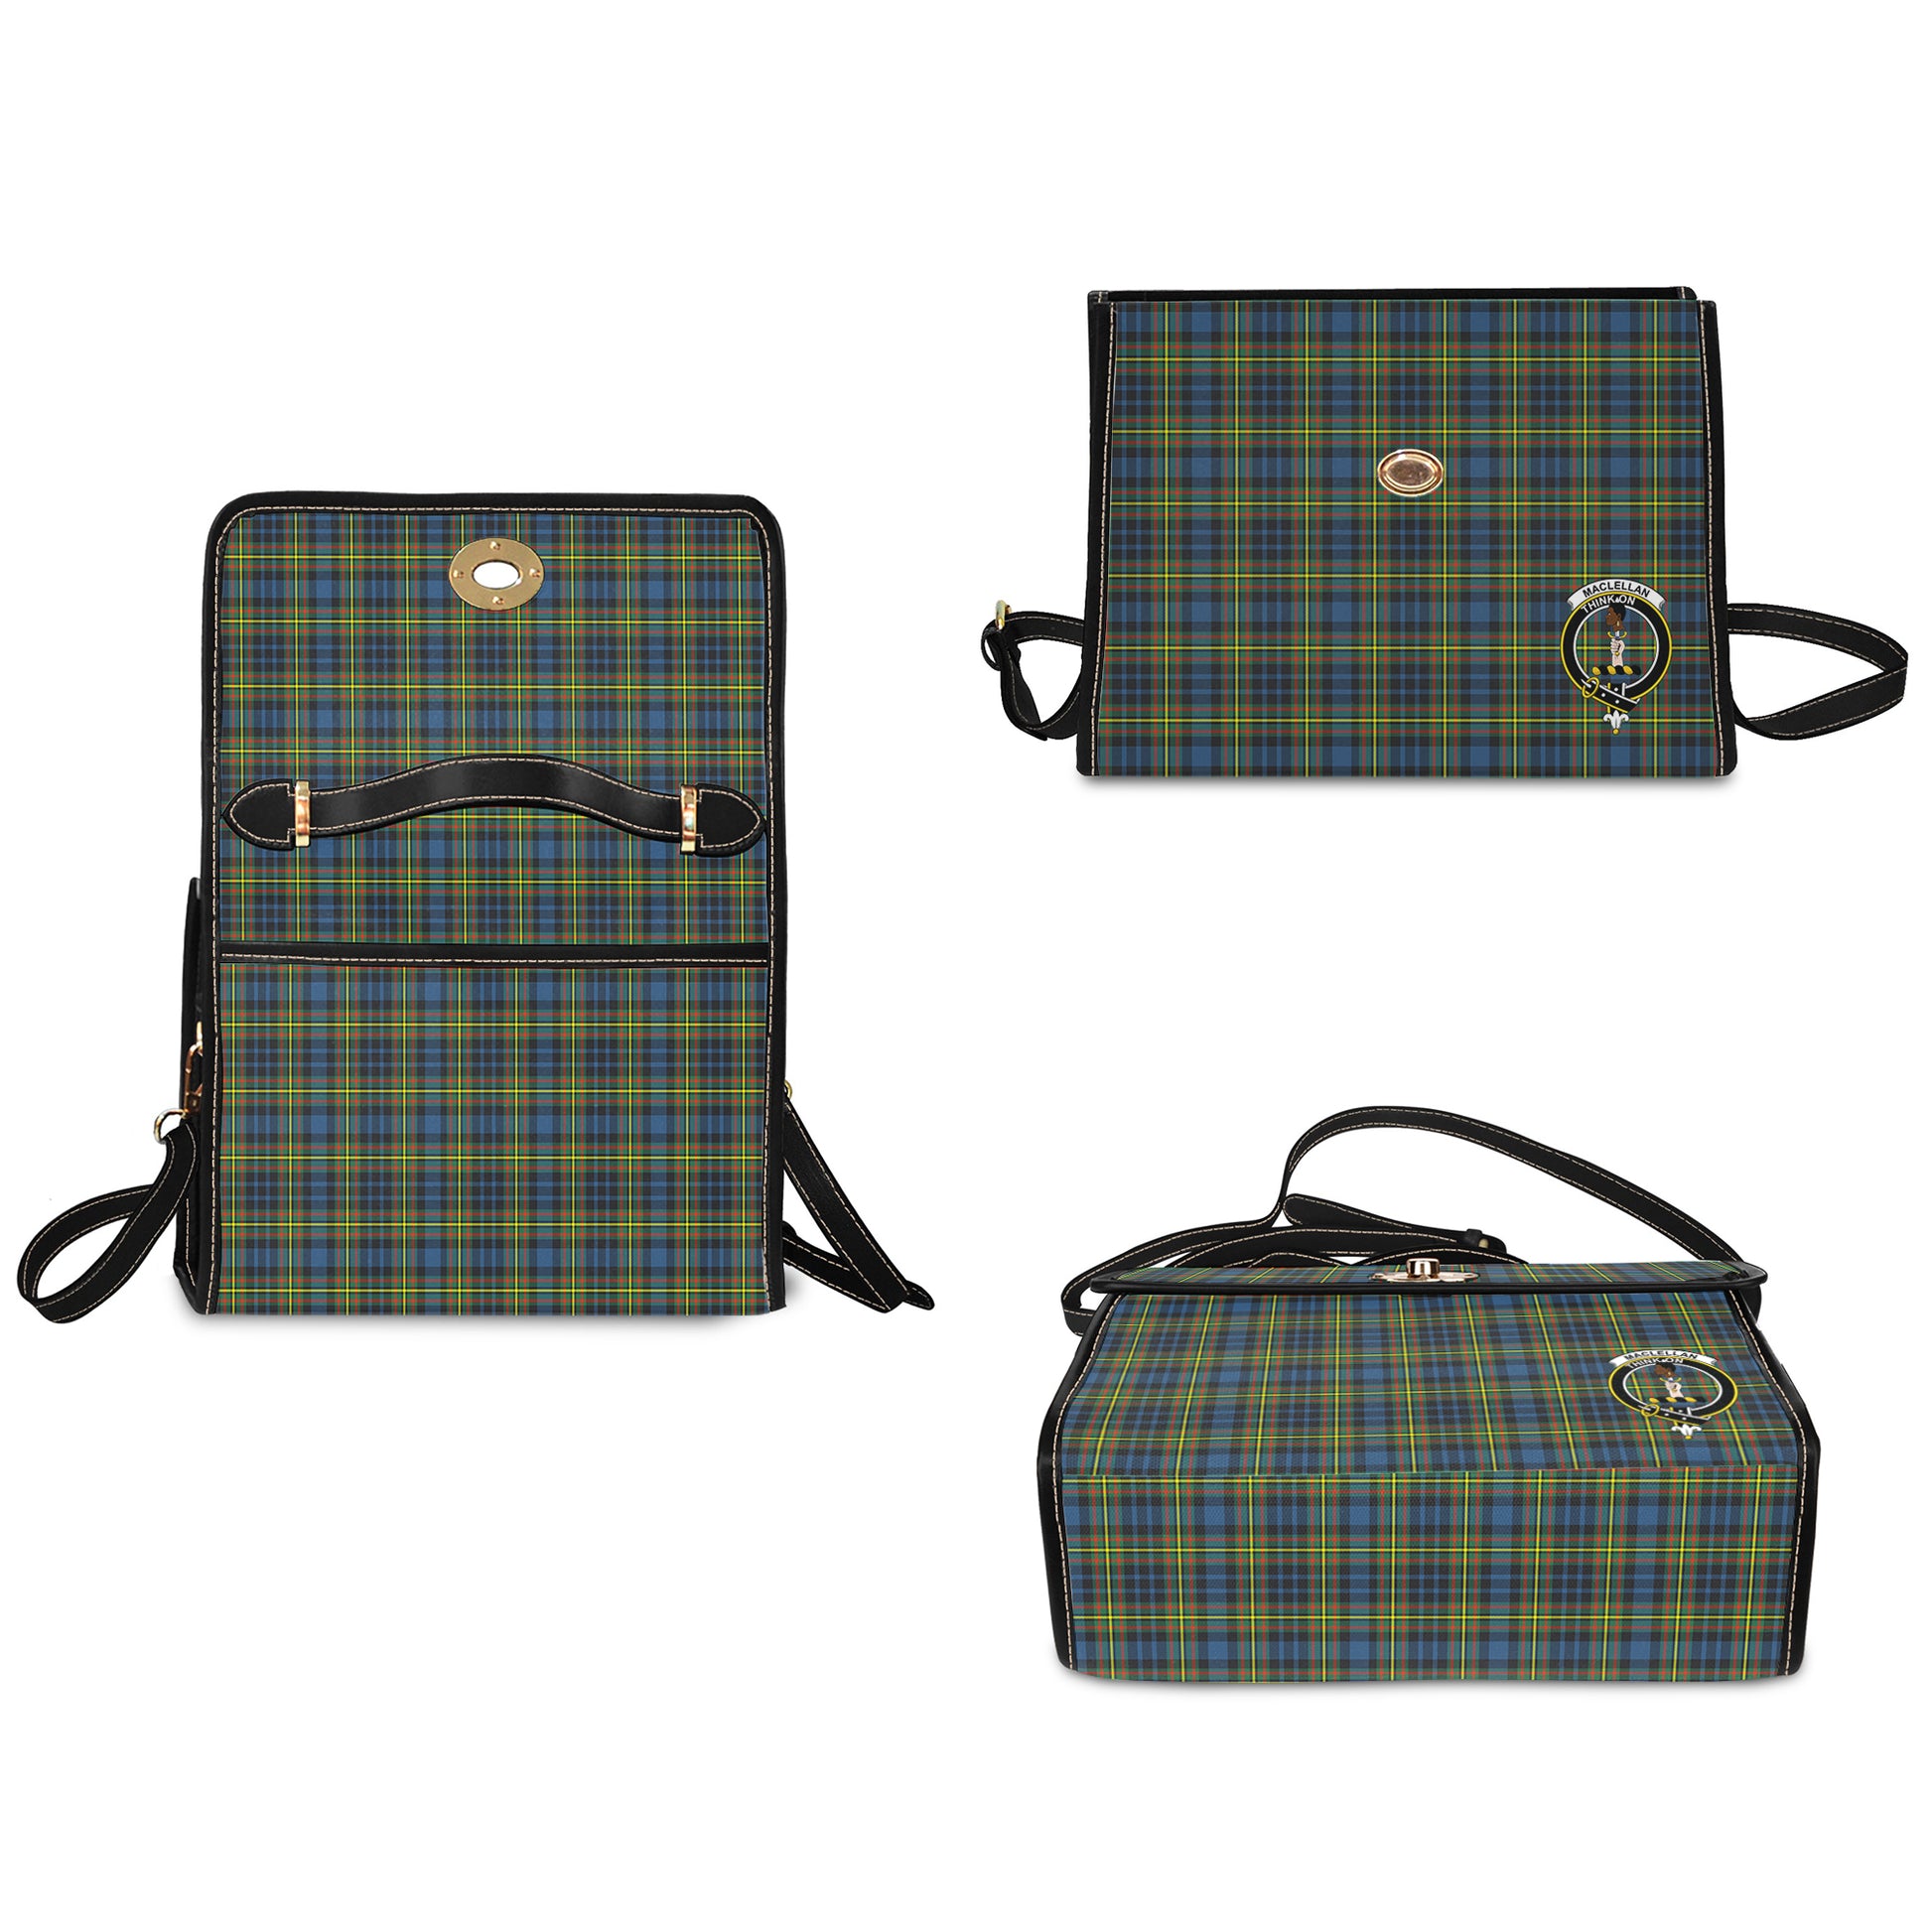 maclellan-ancient-tartan-leather-strap-waterproof-canvas-bag-with-family-crest